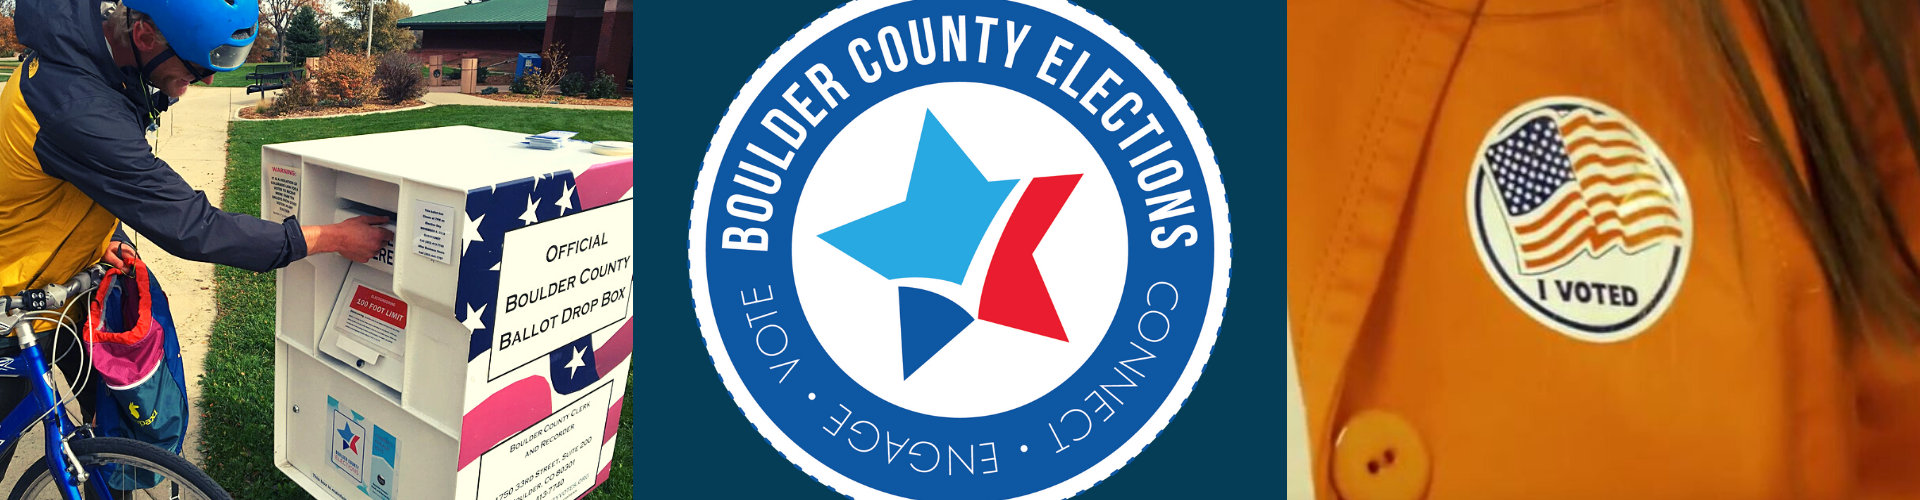 voter dropping off ballot at 24-hour ballot dropbox, Boulder County Elections logo, person wearing "I Voted" sticker